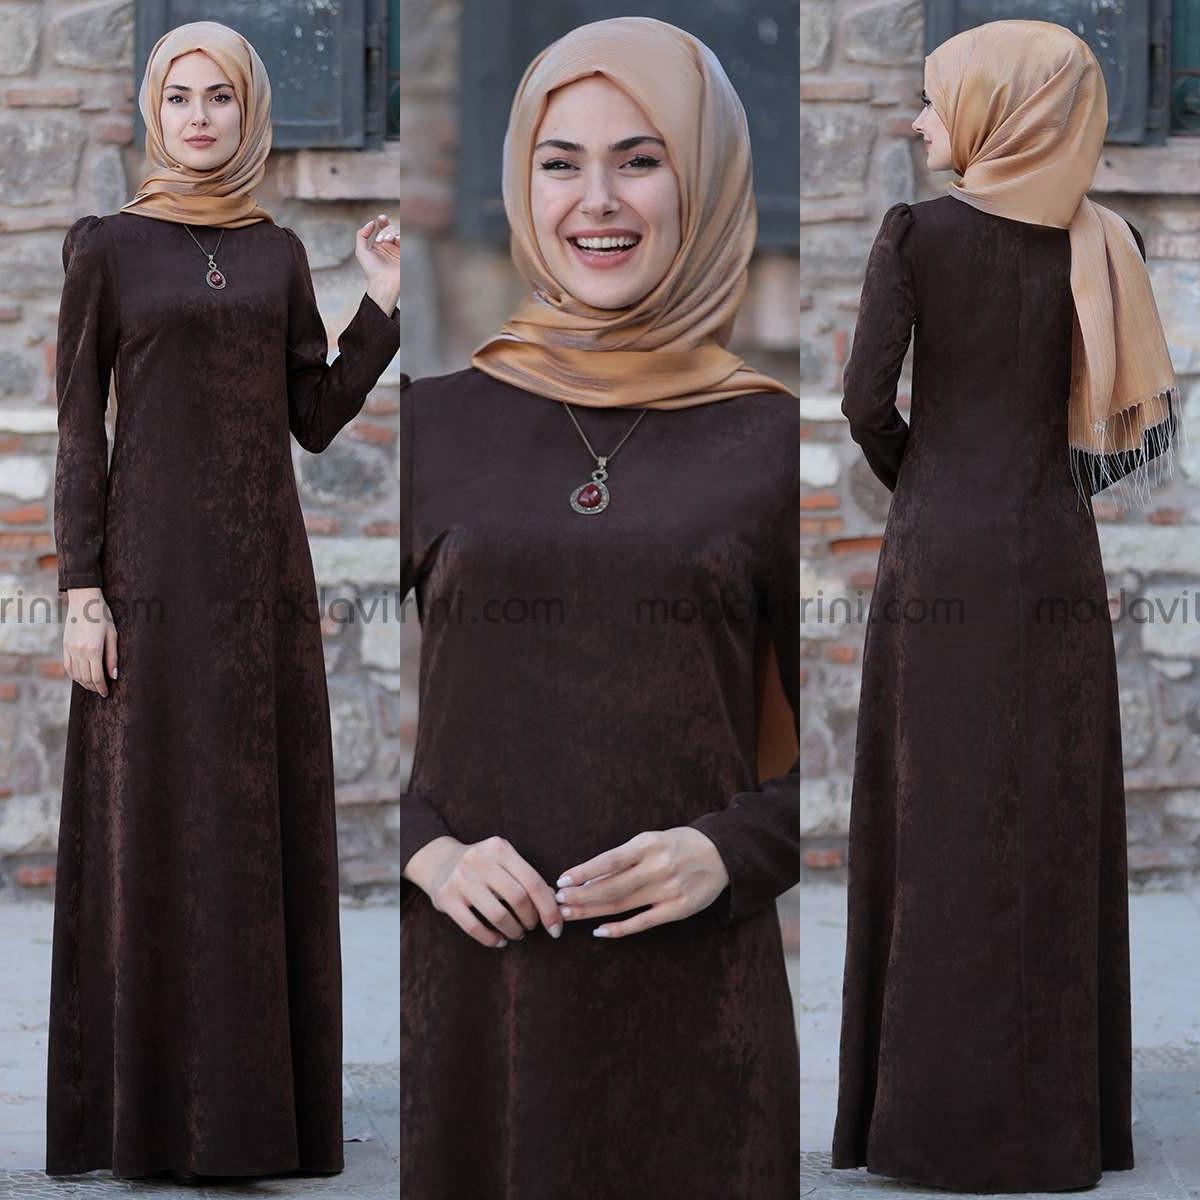 Plus Size Elegance in Modest Clothing